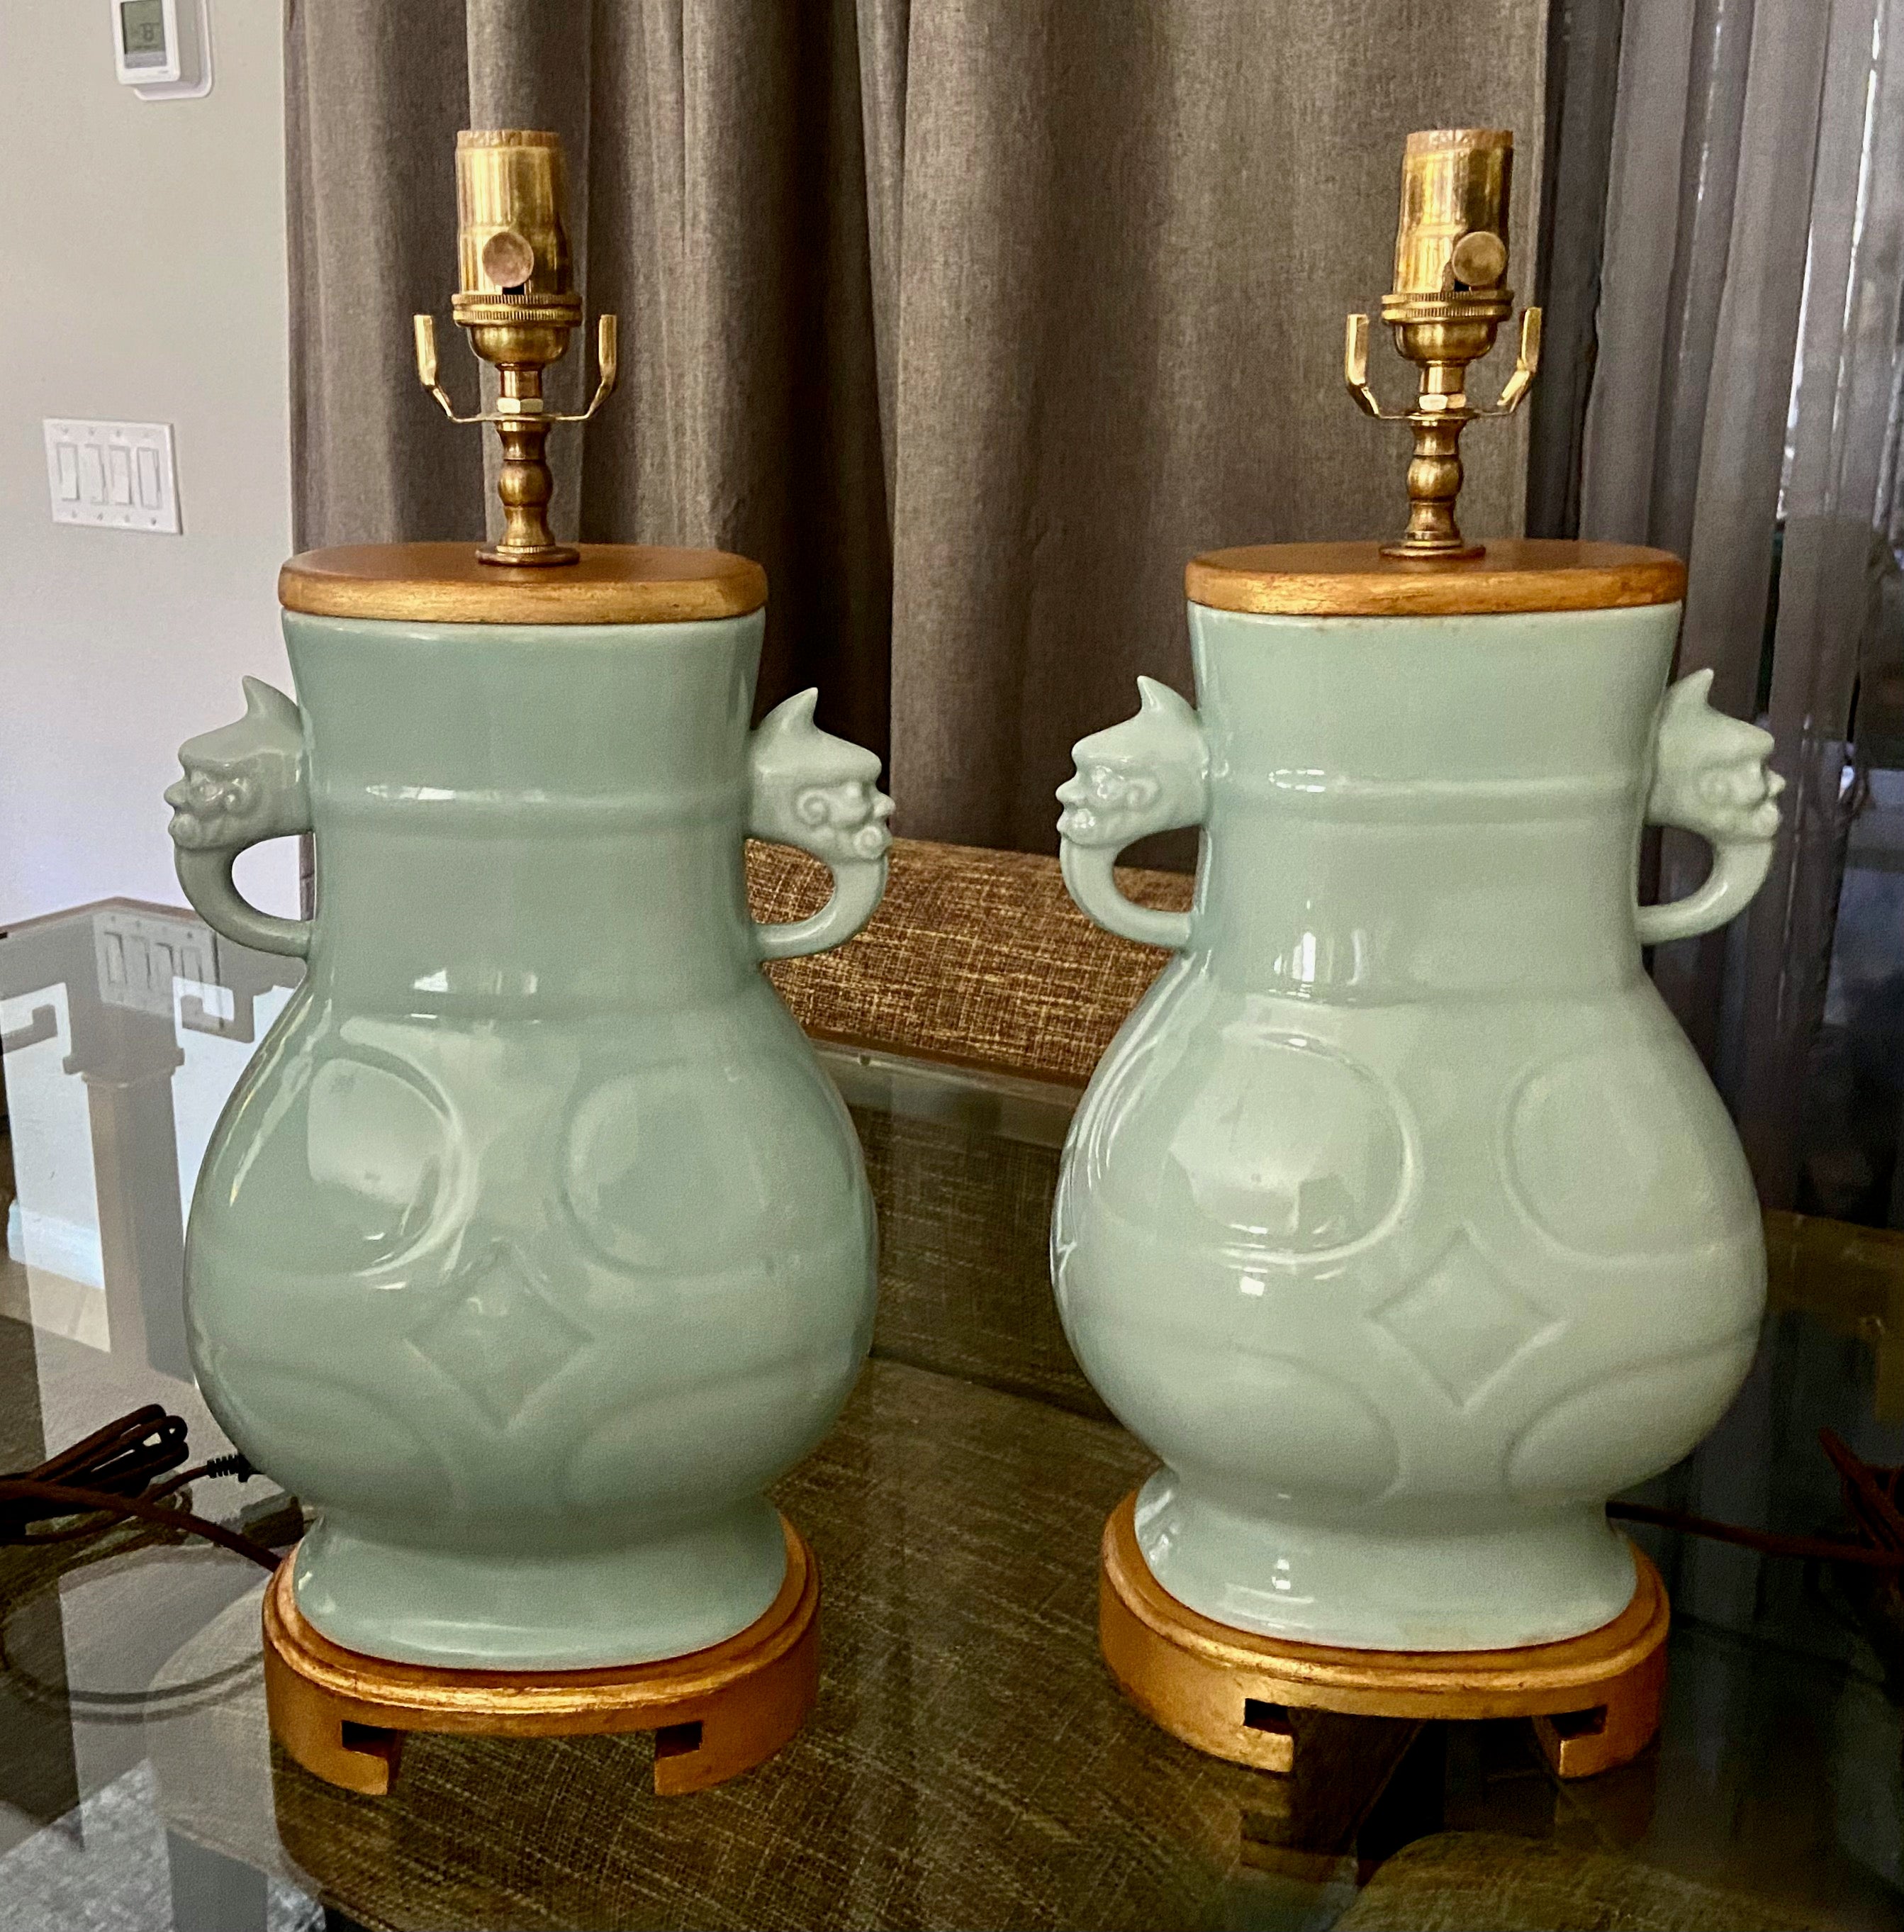 Pair of Chinese Asian celadon green porcelain table lamps with warrior face handles. Each mounted on giltwood bases along with matching vase cap. Newly wired with new 3 way brass sockets and rayon cords. The rectangular shape measures 21